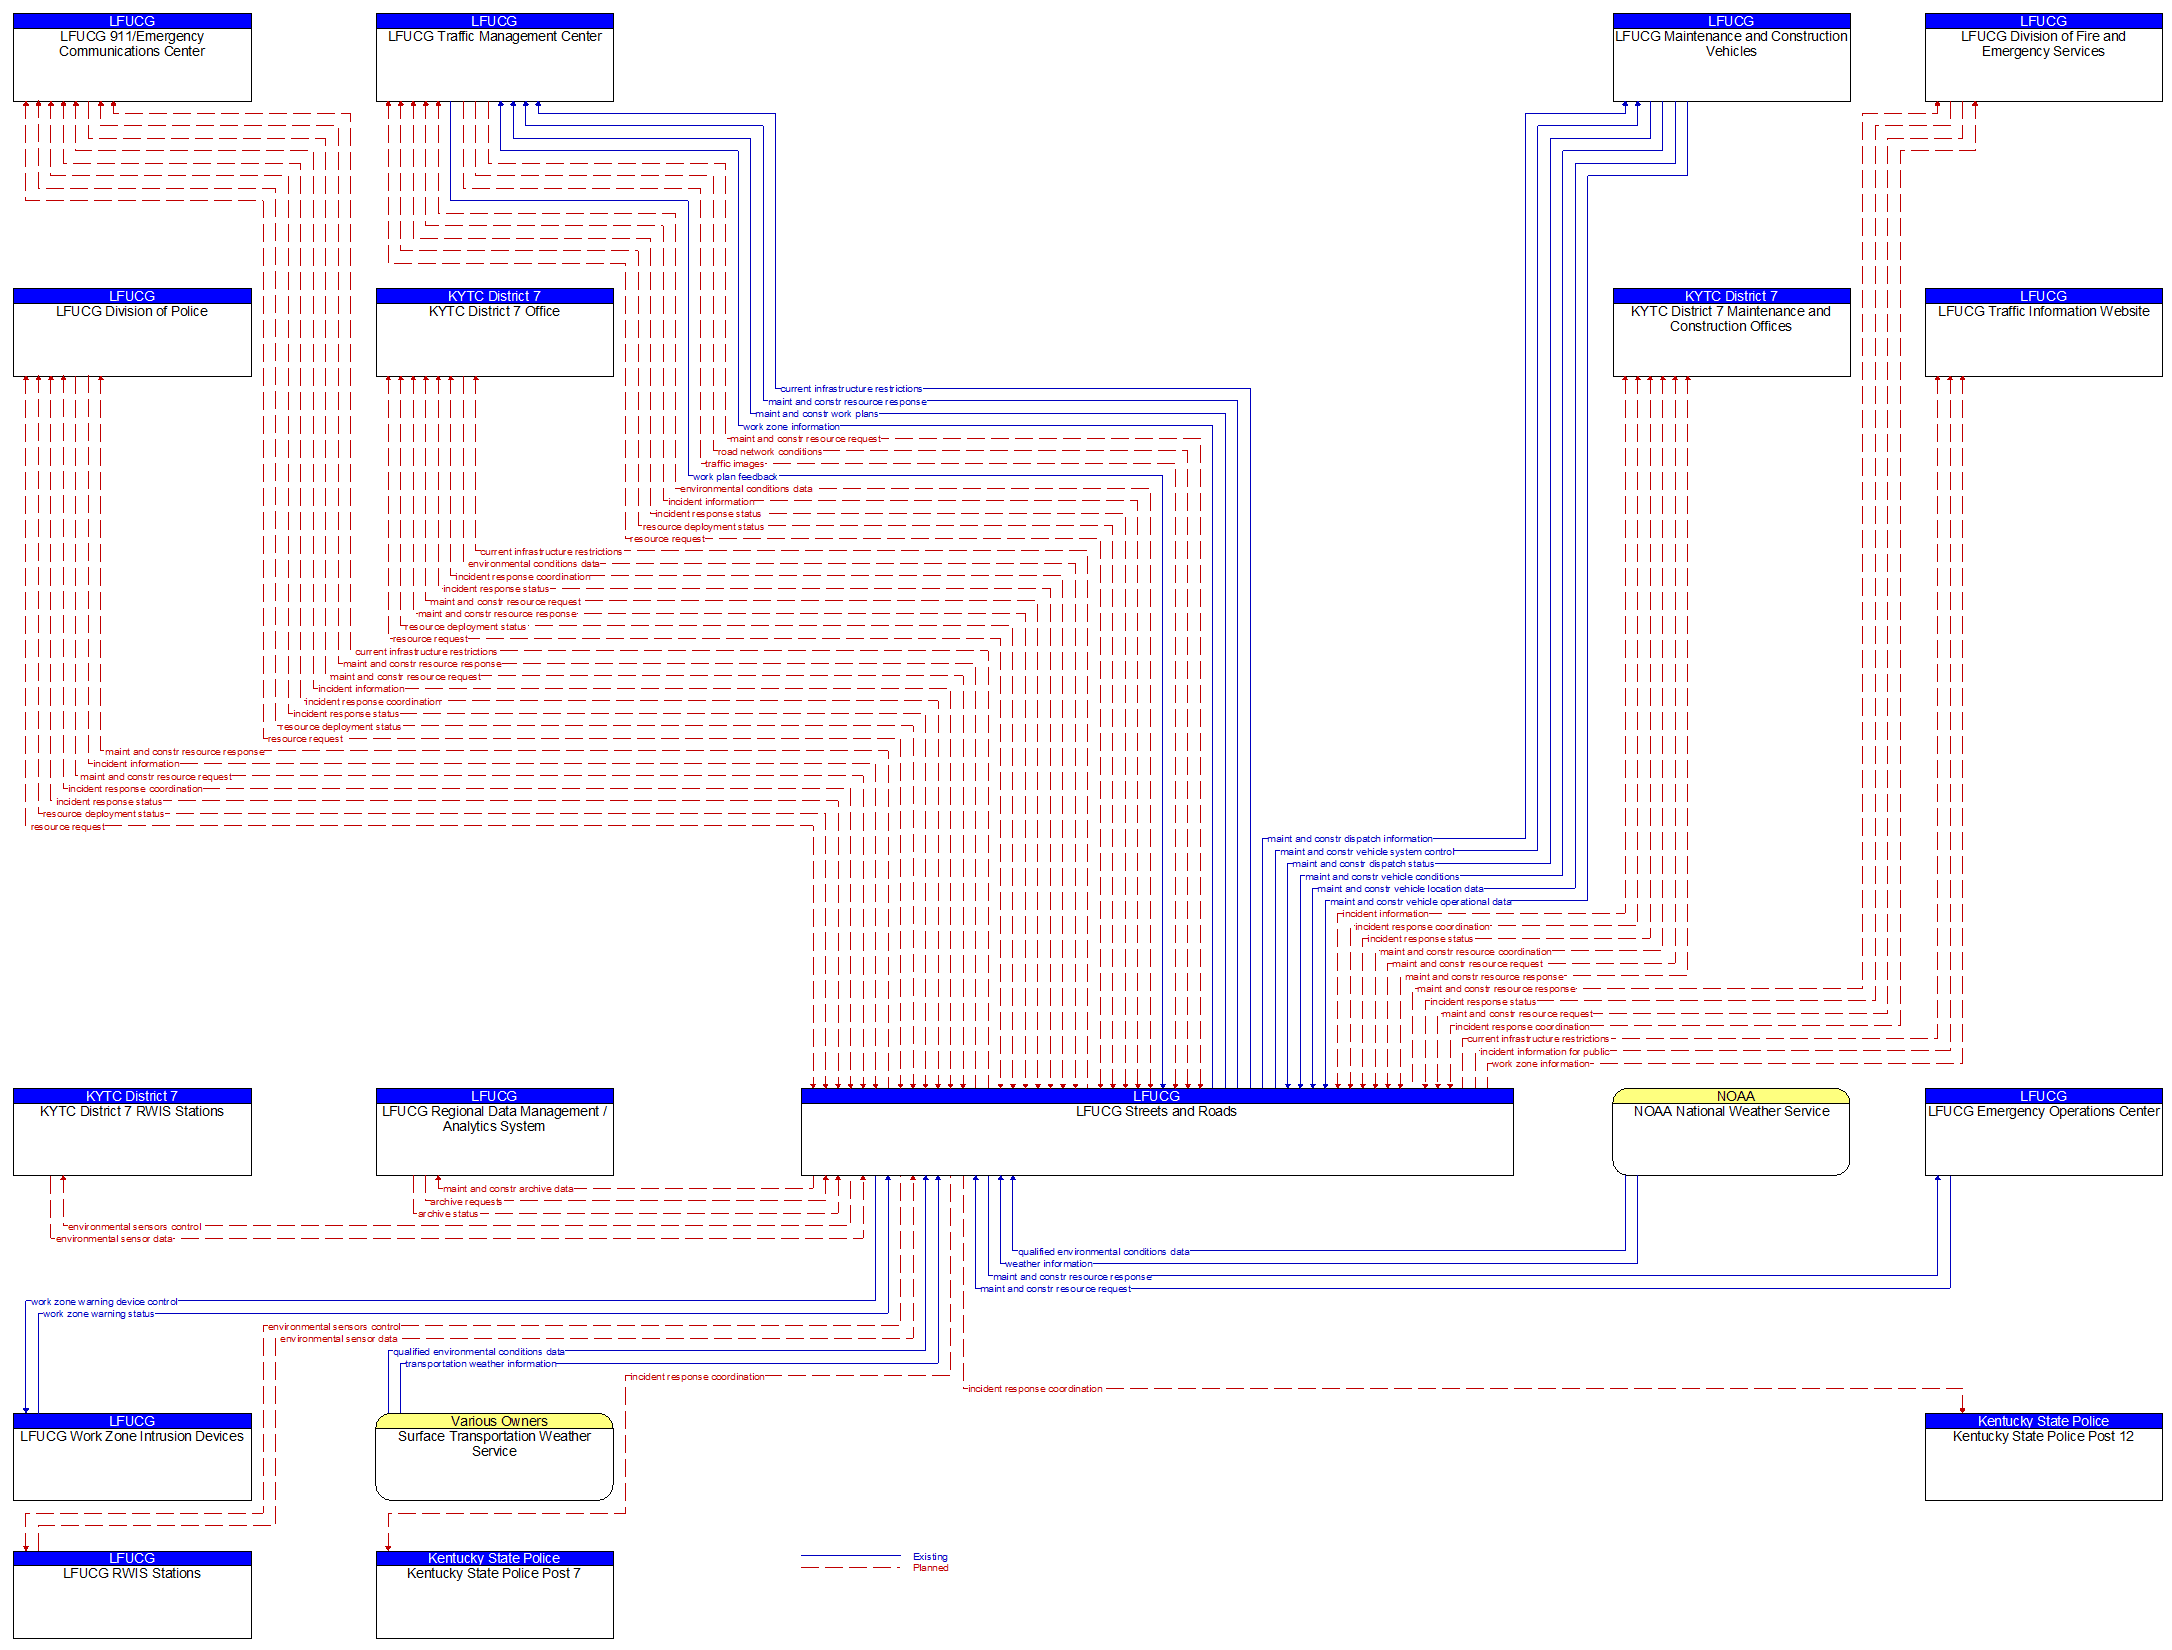 Context Diagram - LFUCG Streets and Roads